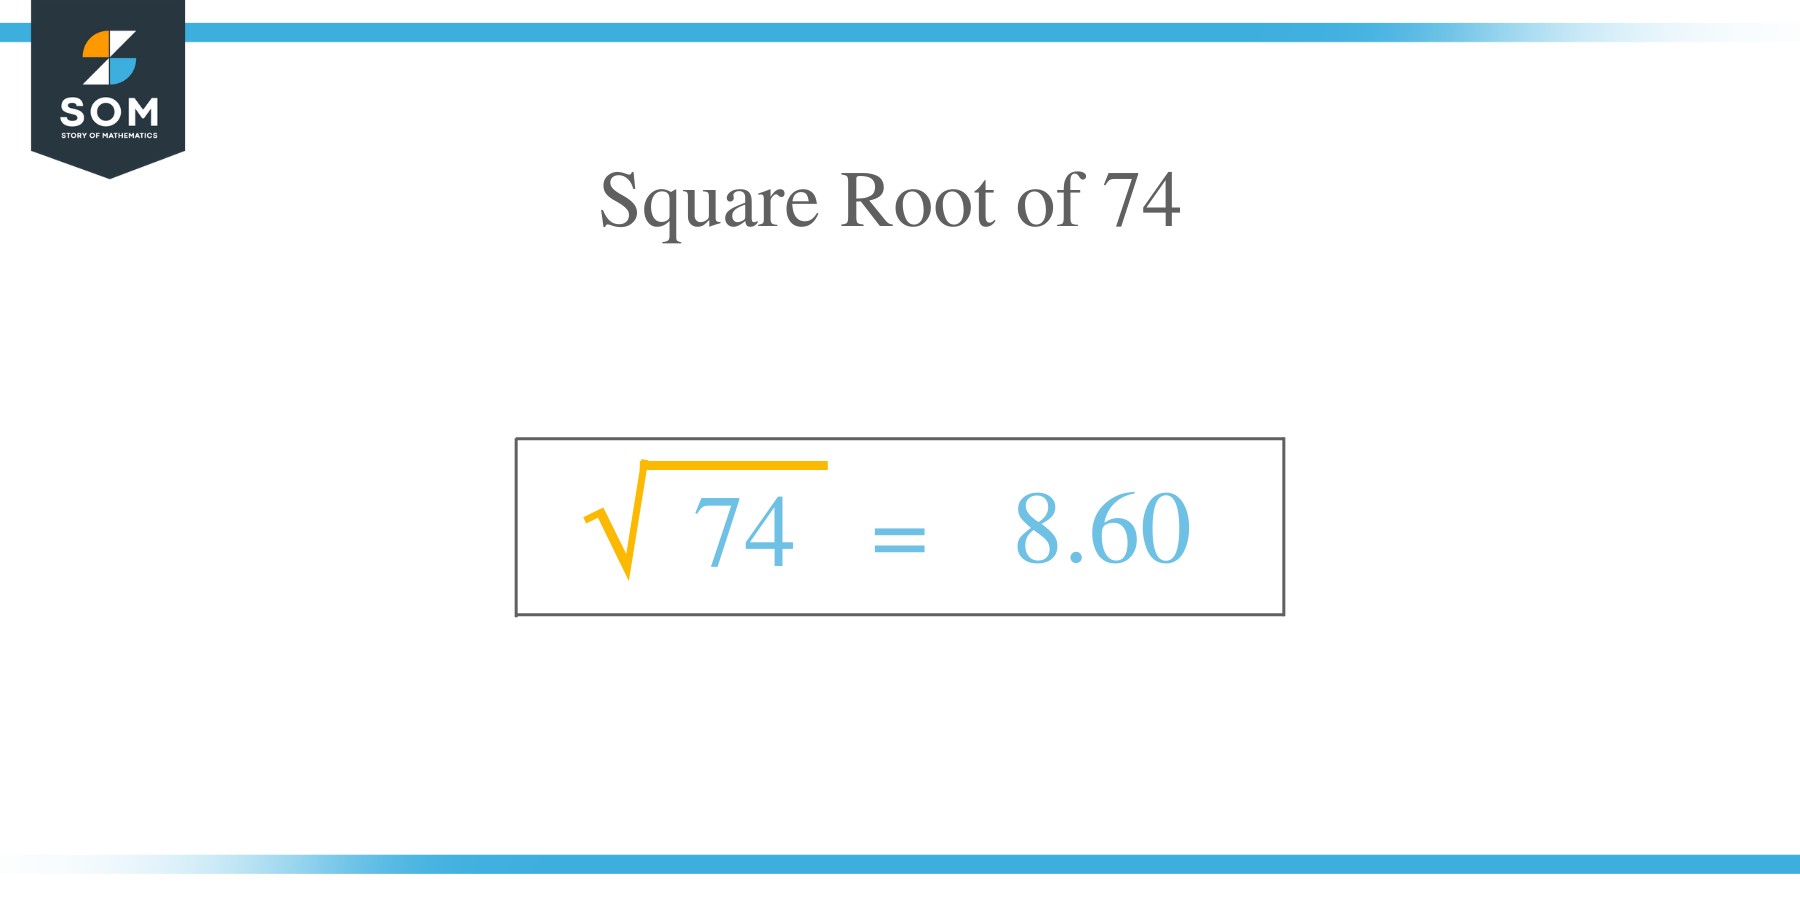 Square Root of 74